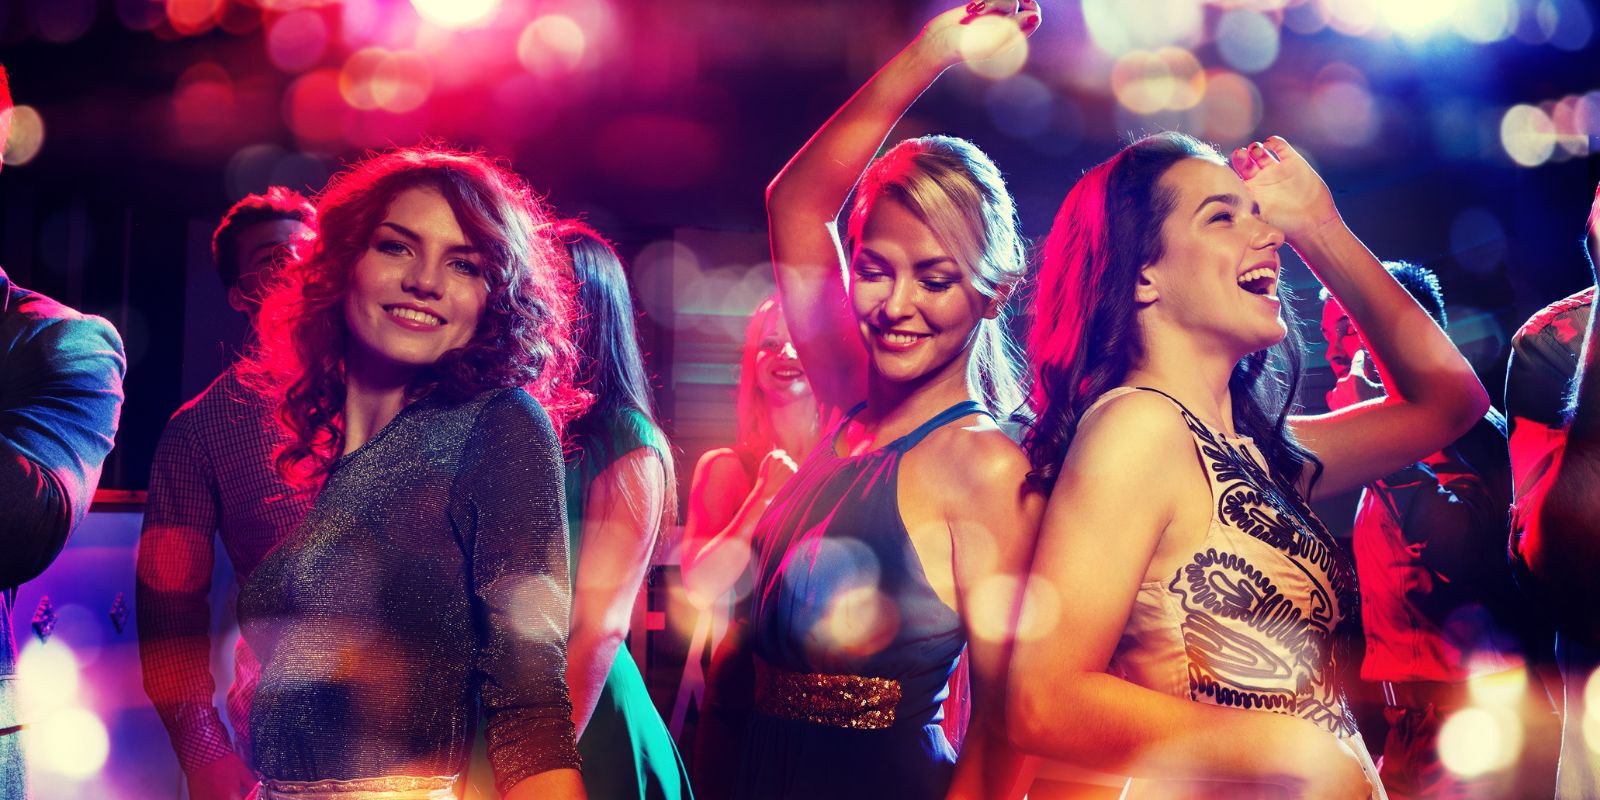 A group of women dancing at a club